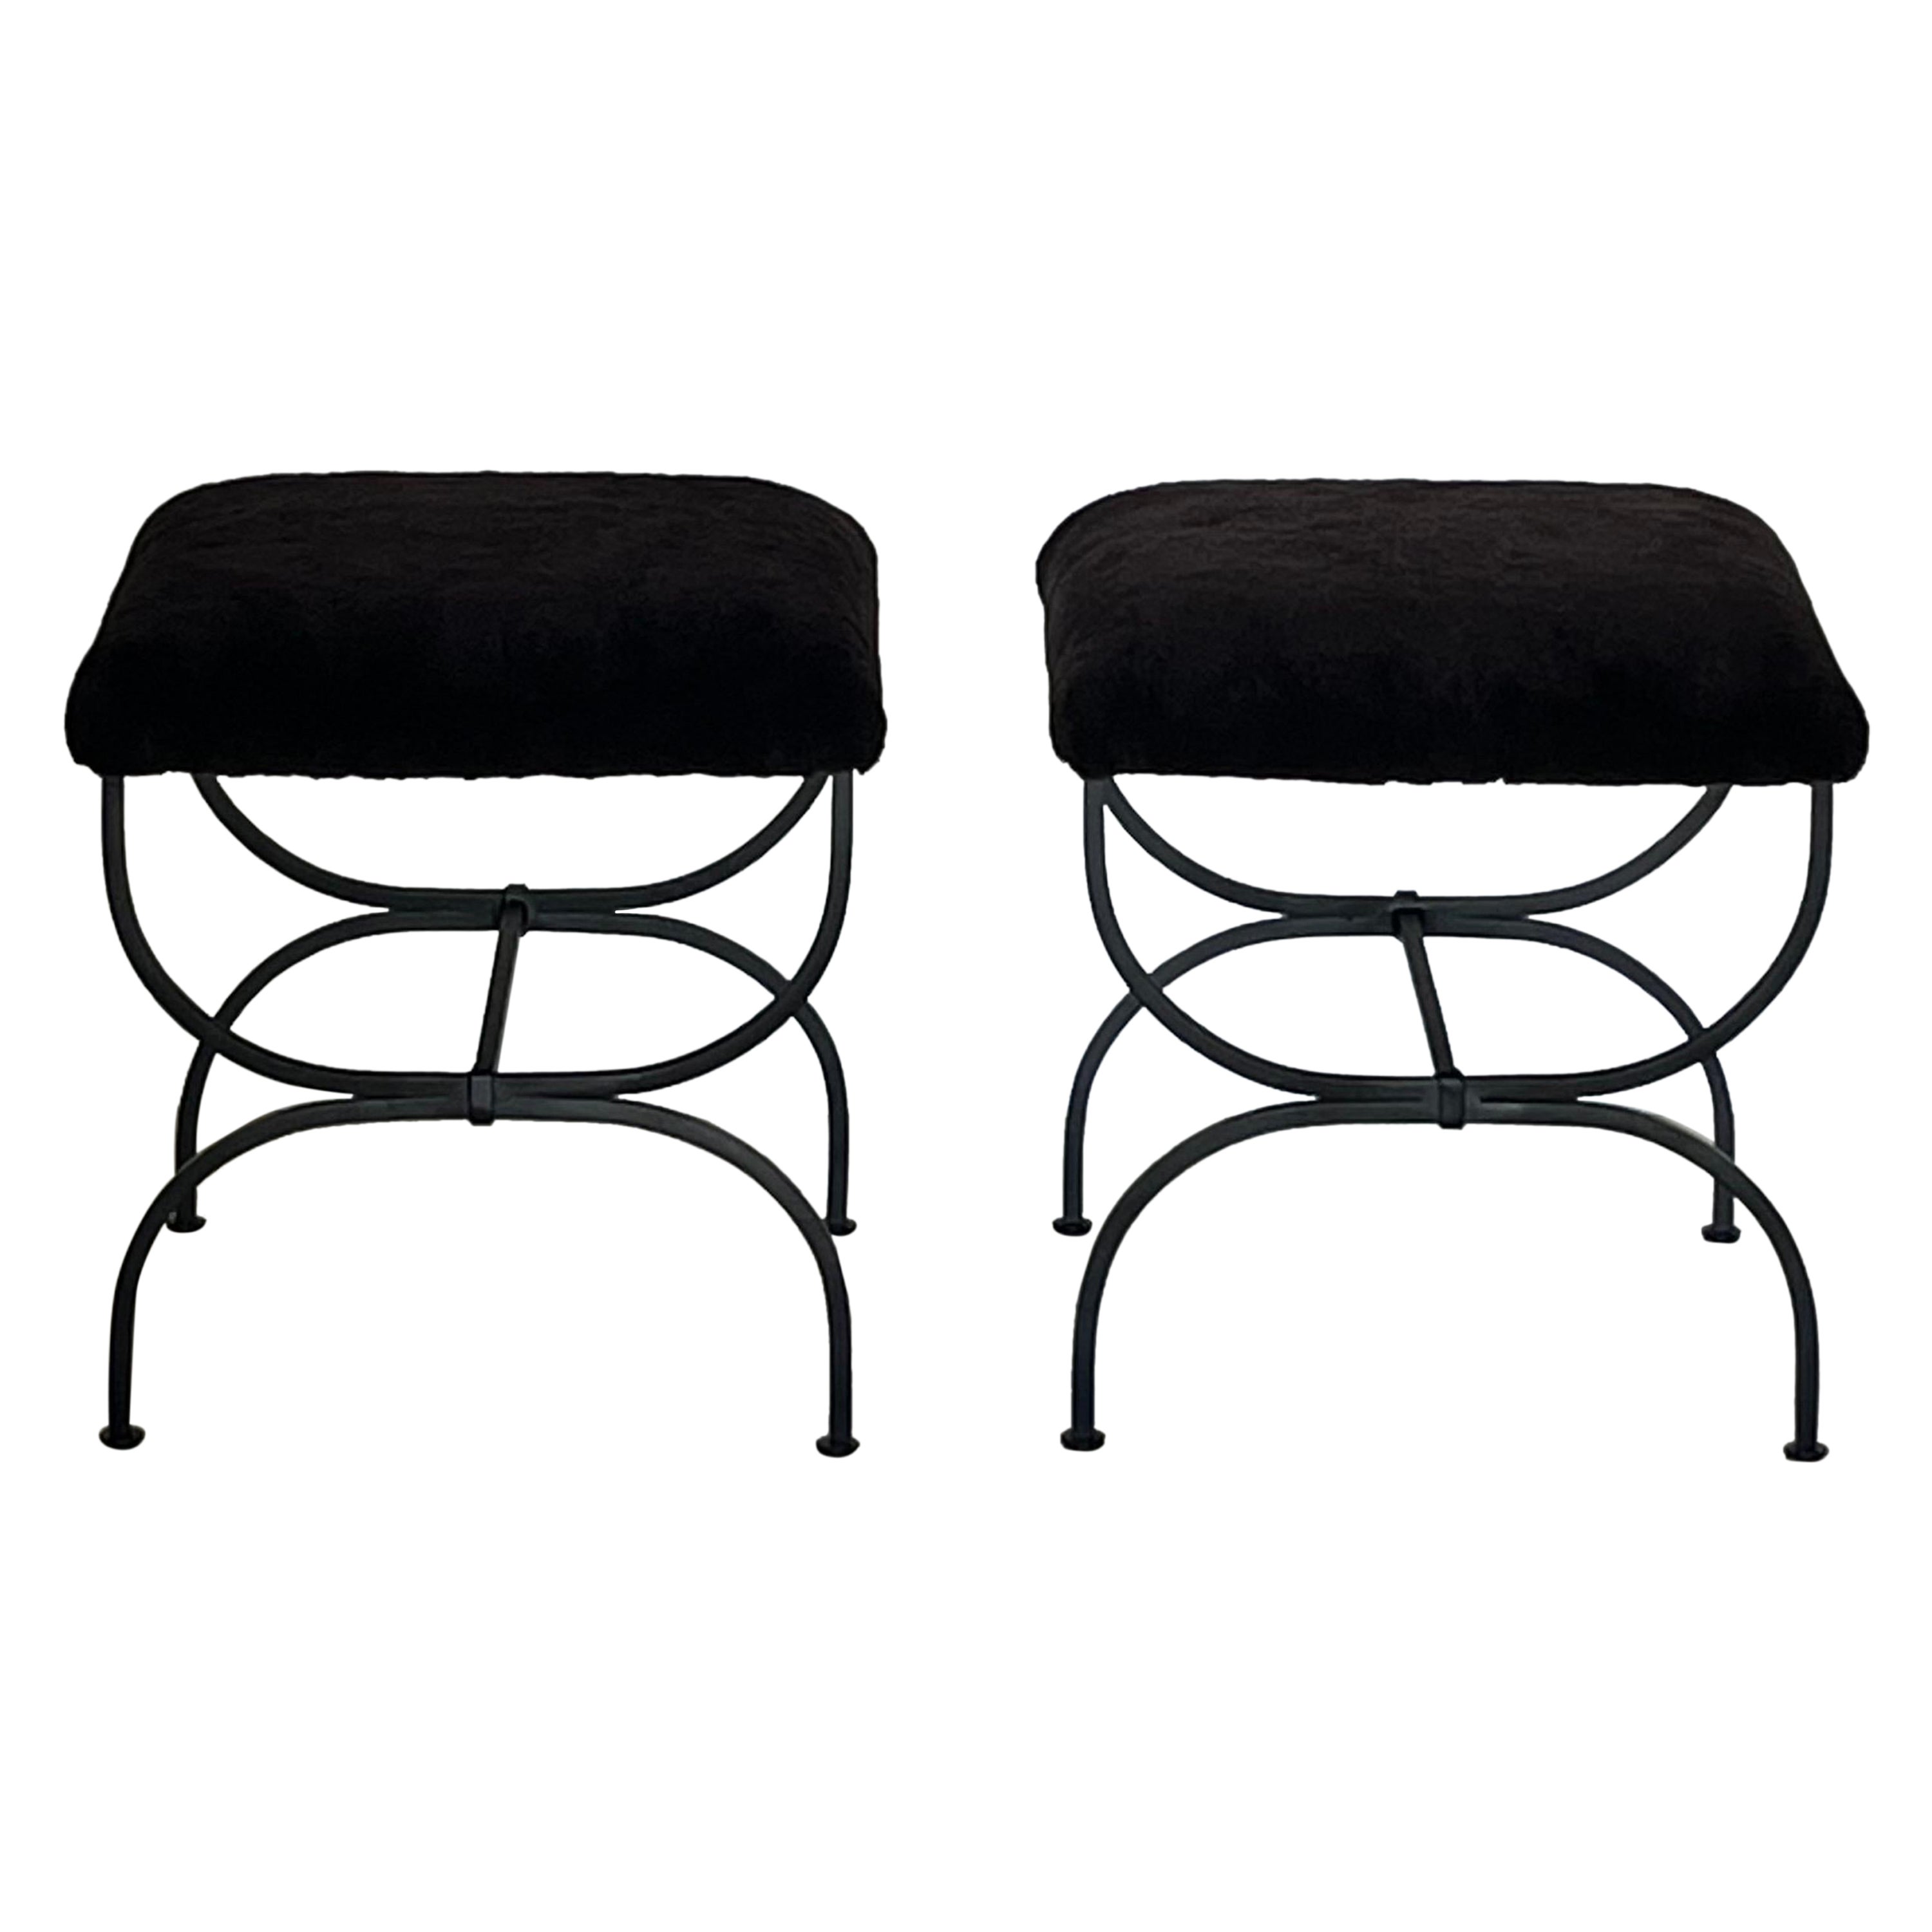 Pair of 'Strapontin' dark gray shearling stools by Design Frères